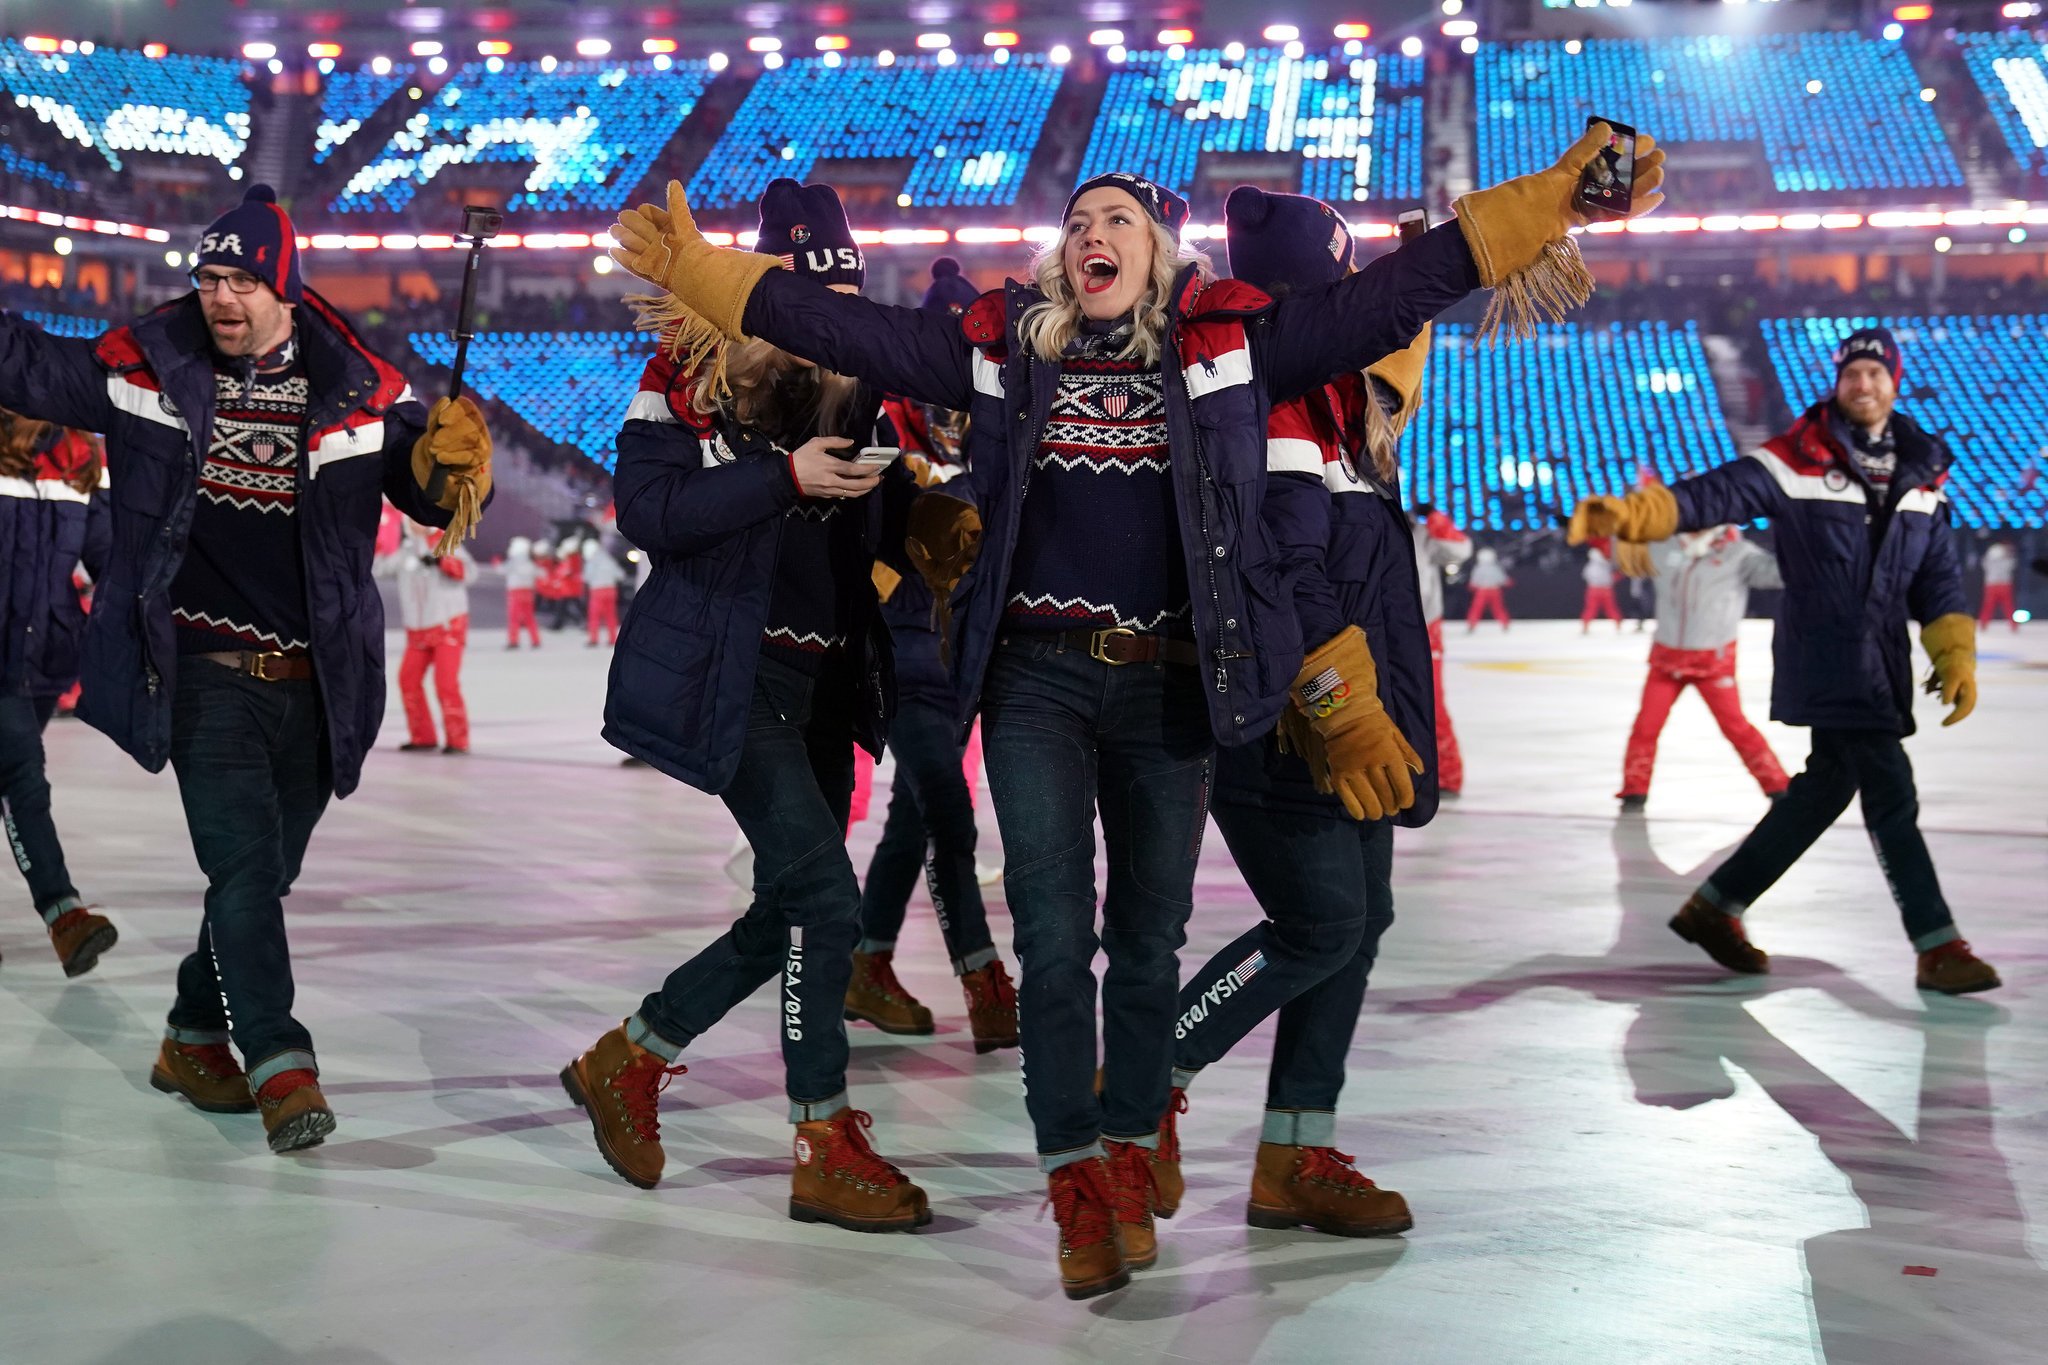 American Team at the Opening Ceremony of 2018 Winter Olympics